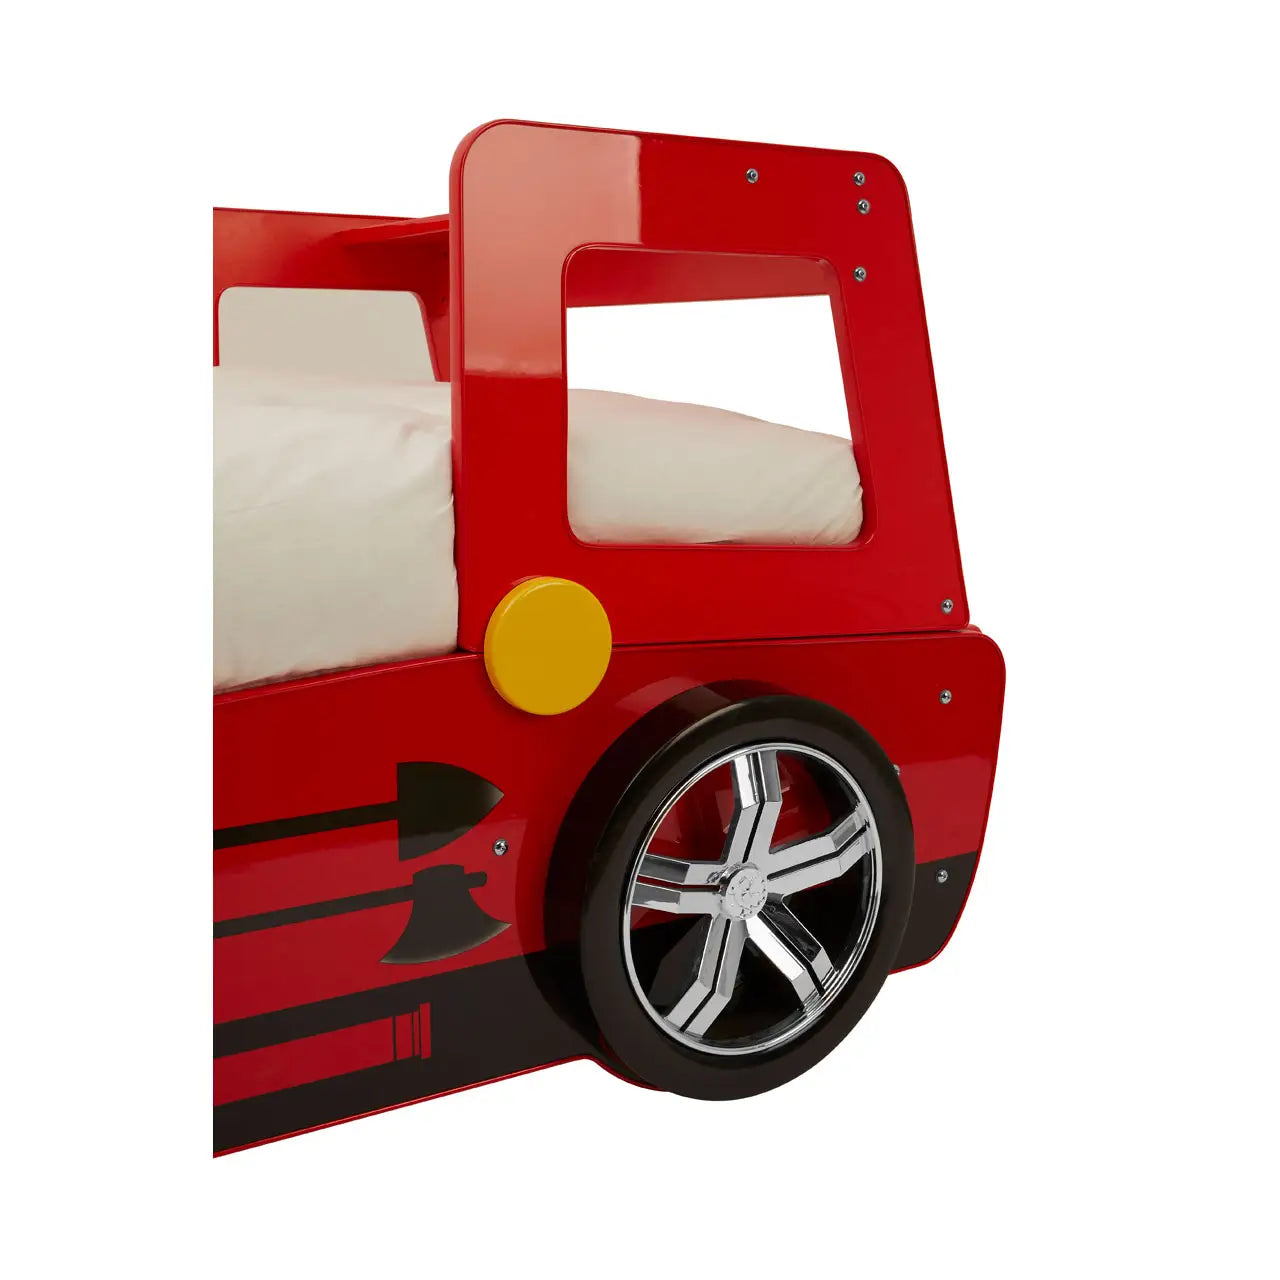 Red Fire Engine Bed